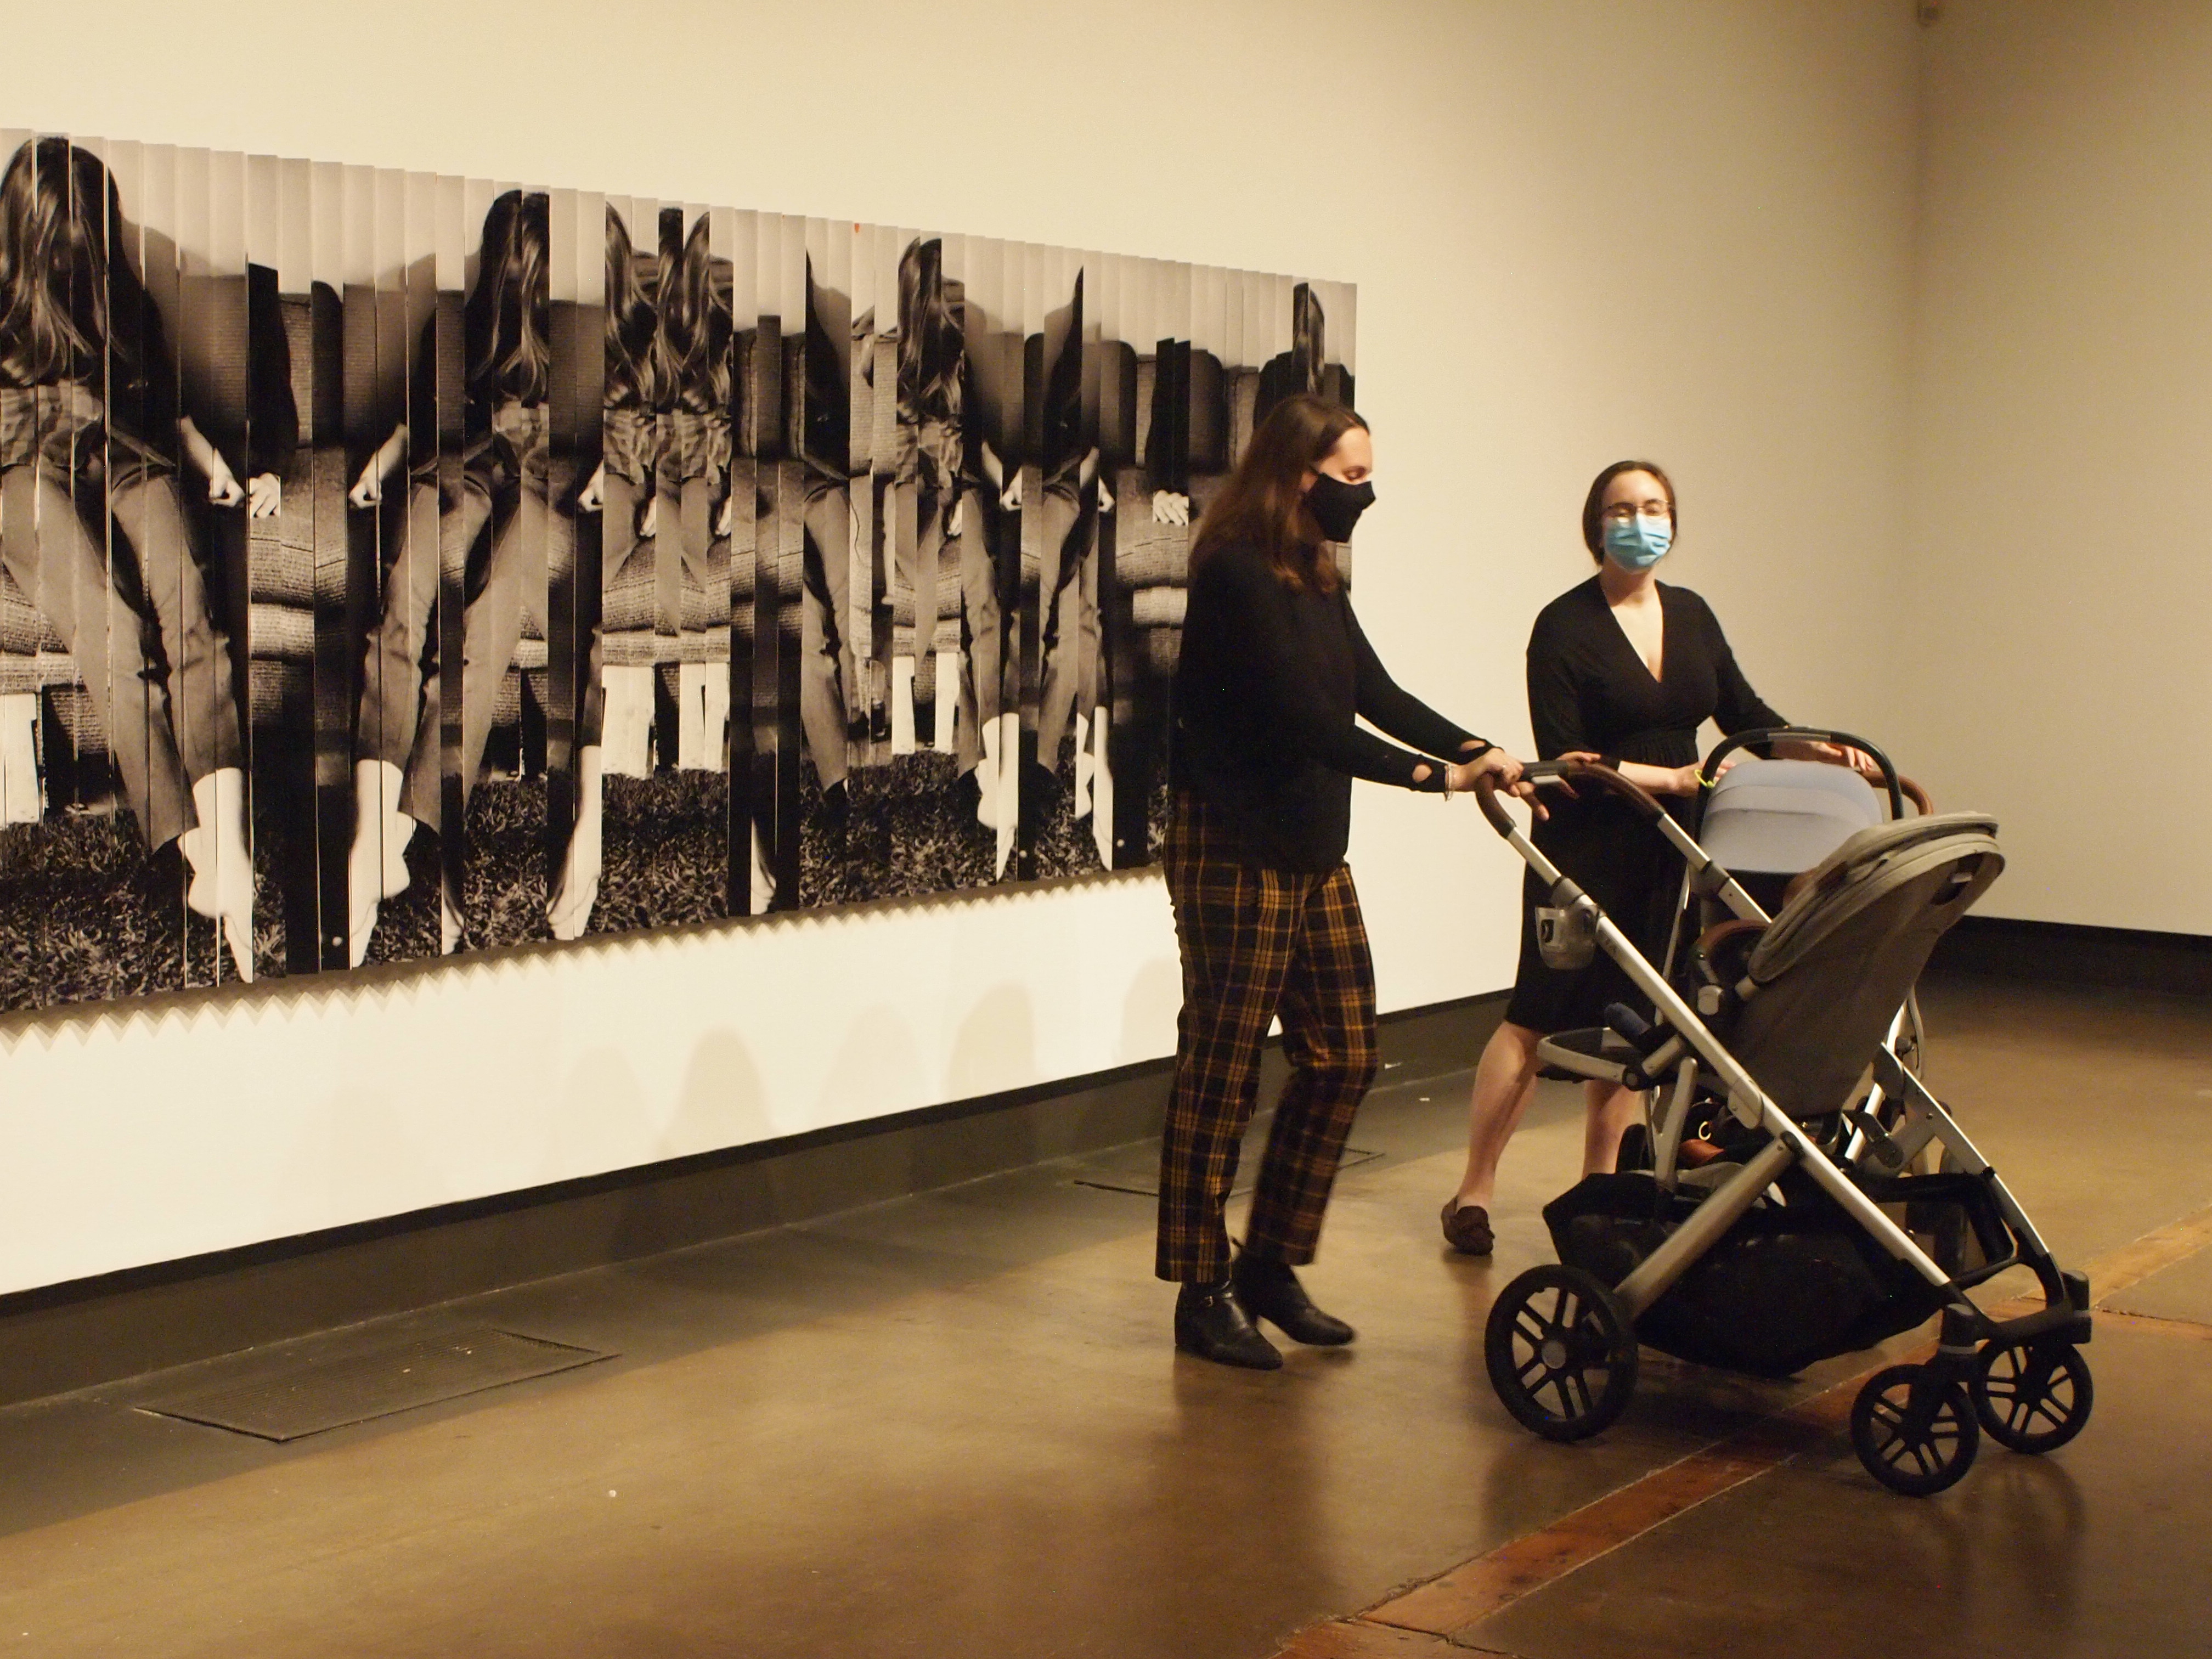 Three mothers with strollers stand together at the end of the Corridor Gallery